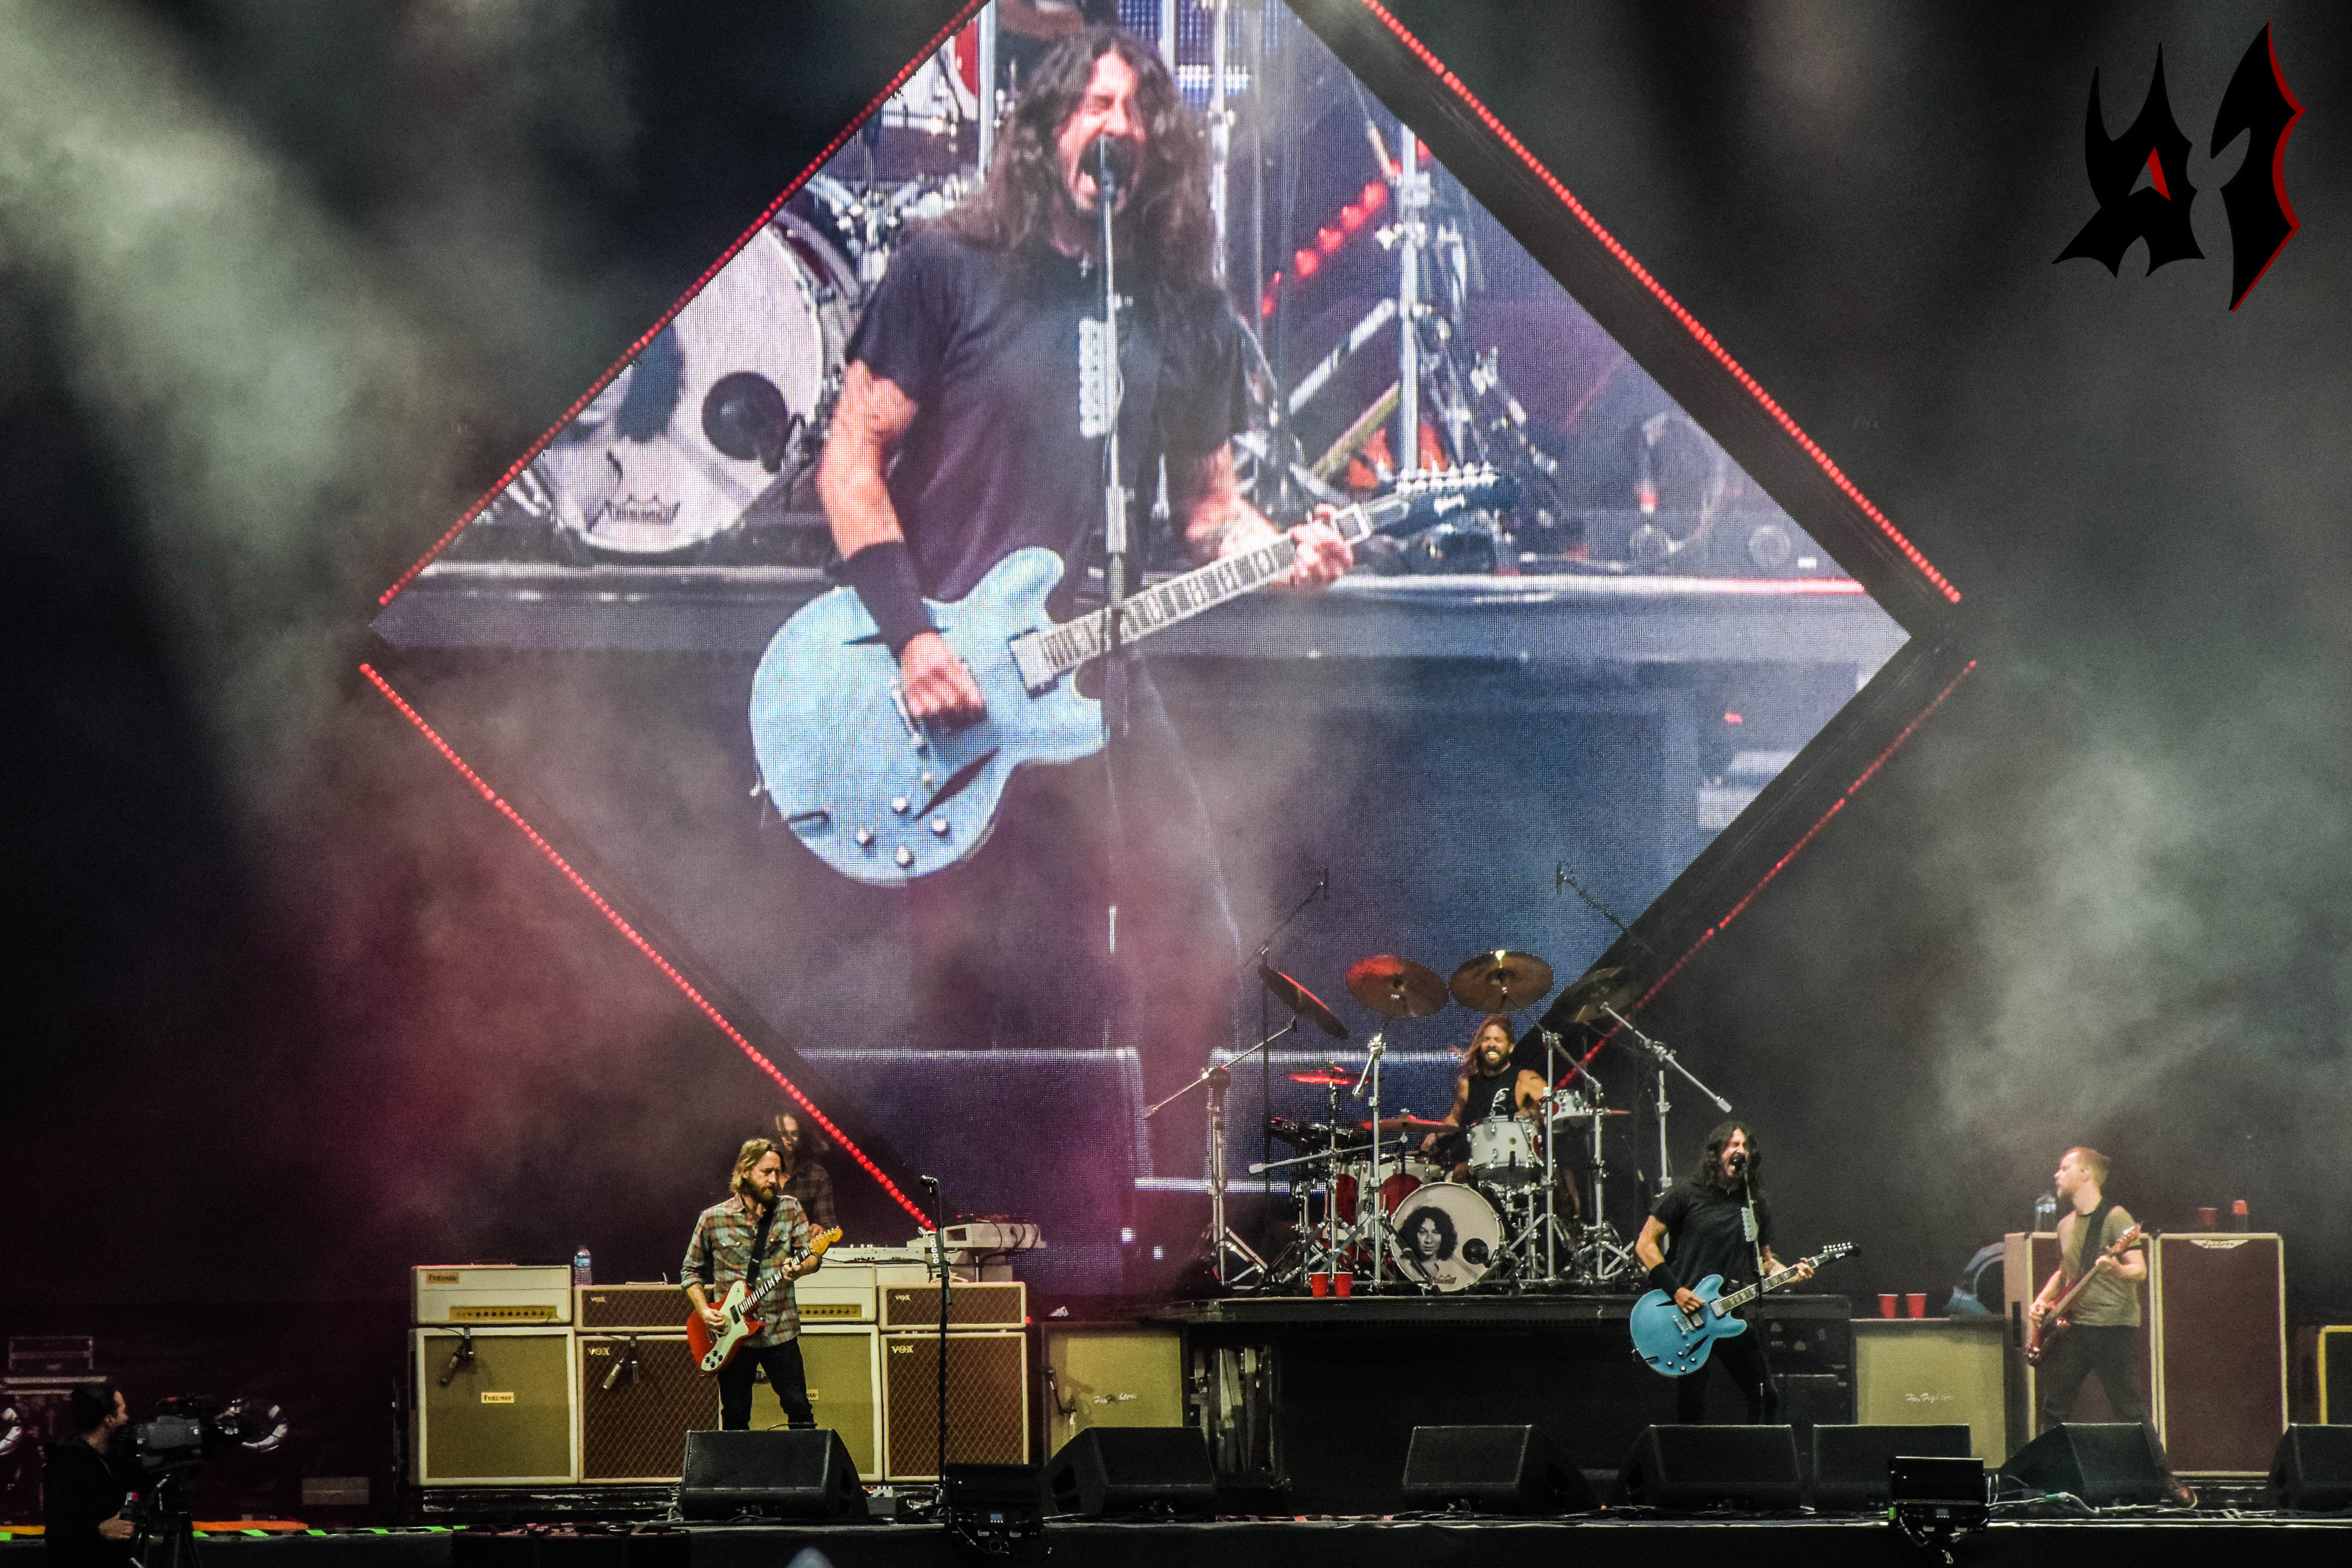 Donwload 2018 – Day 3 - Foo Fighters 4